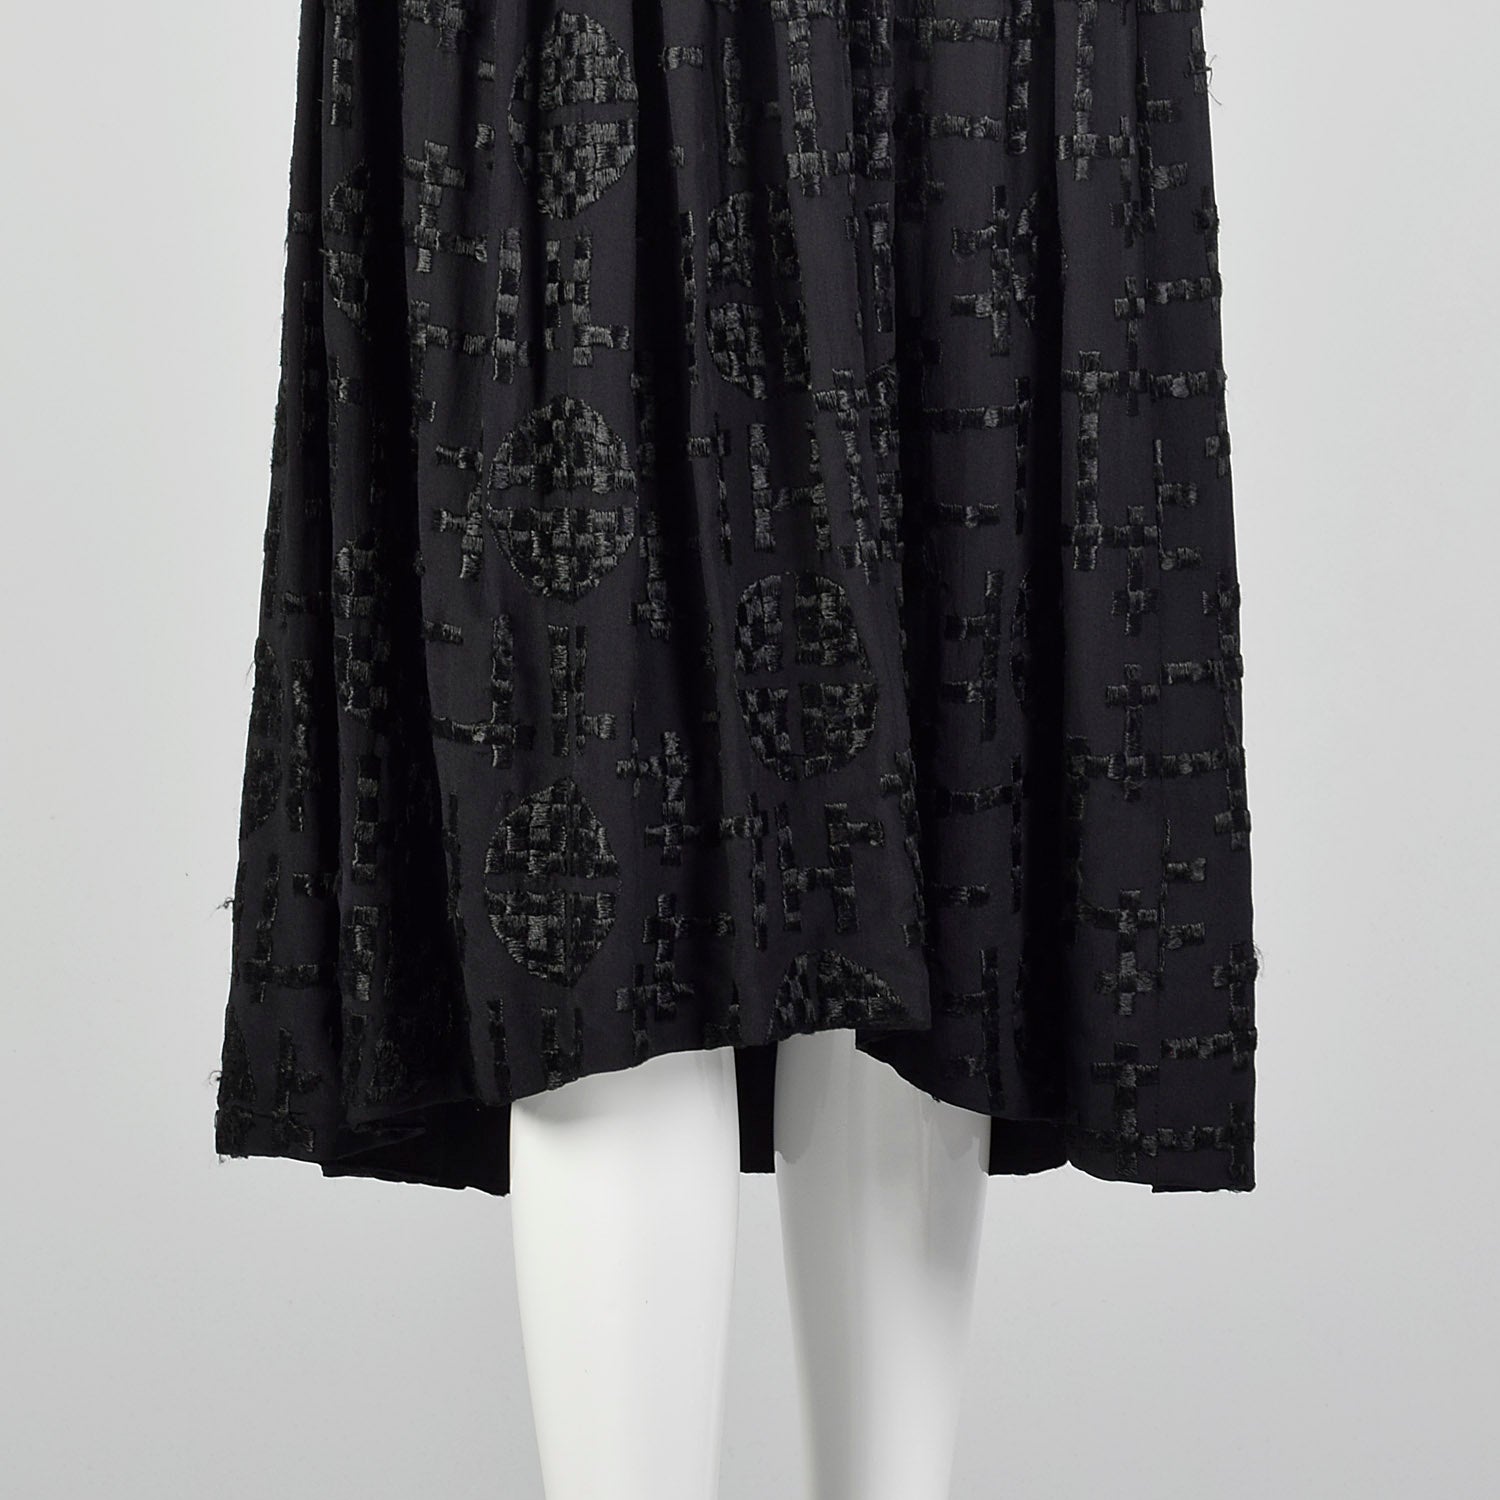 1930s Black Embroidered Deco Dress